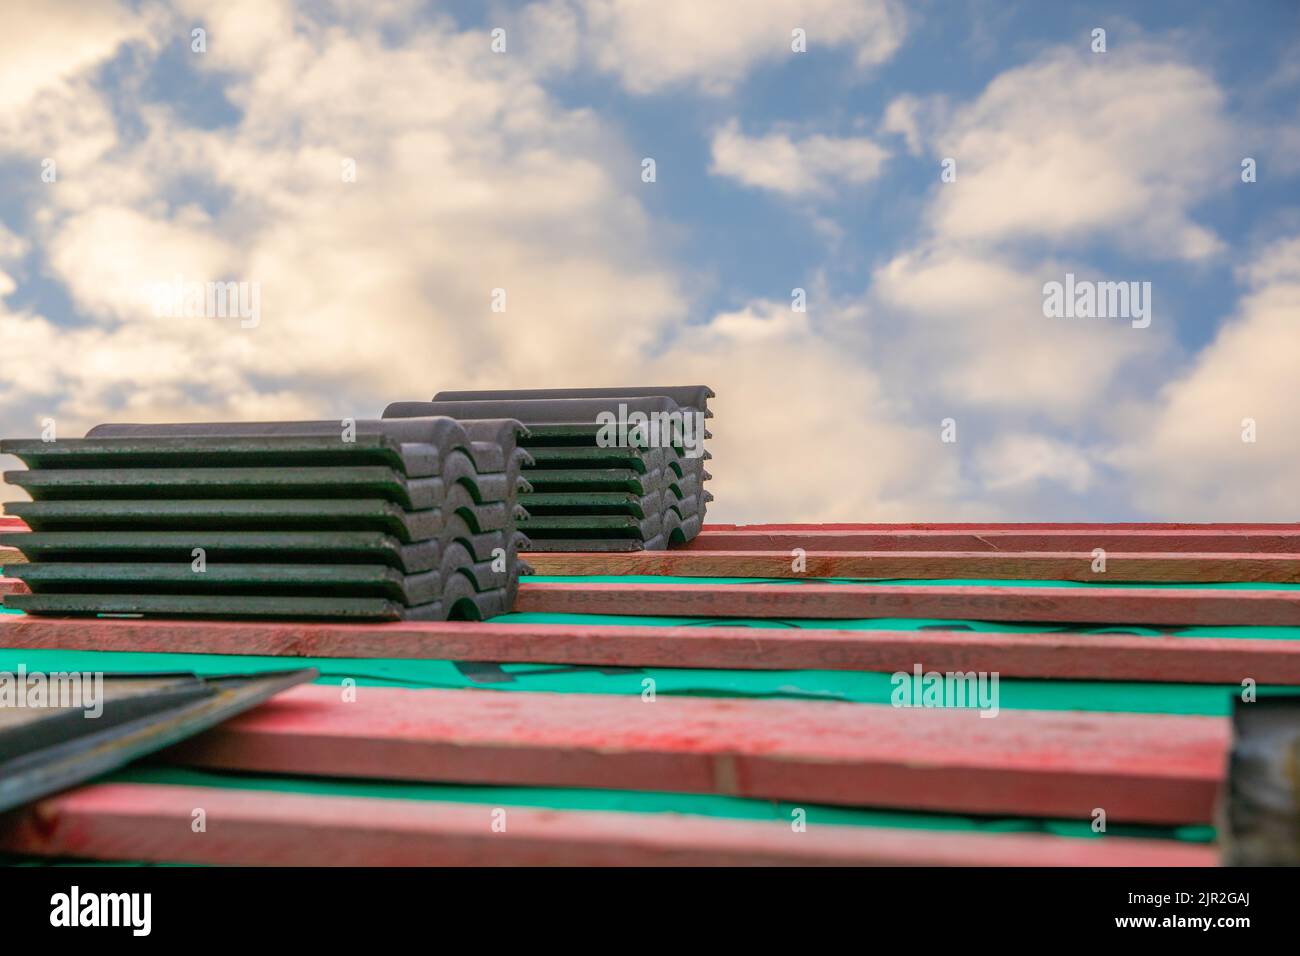 Piles of roof tiles on a bare roof with clouds behind Stock Photo